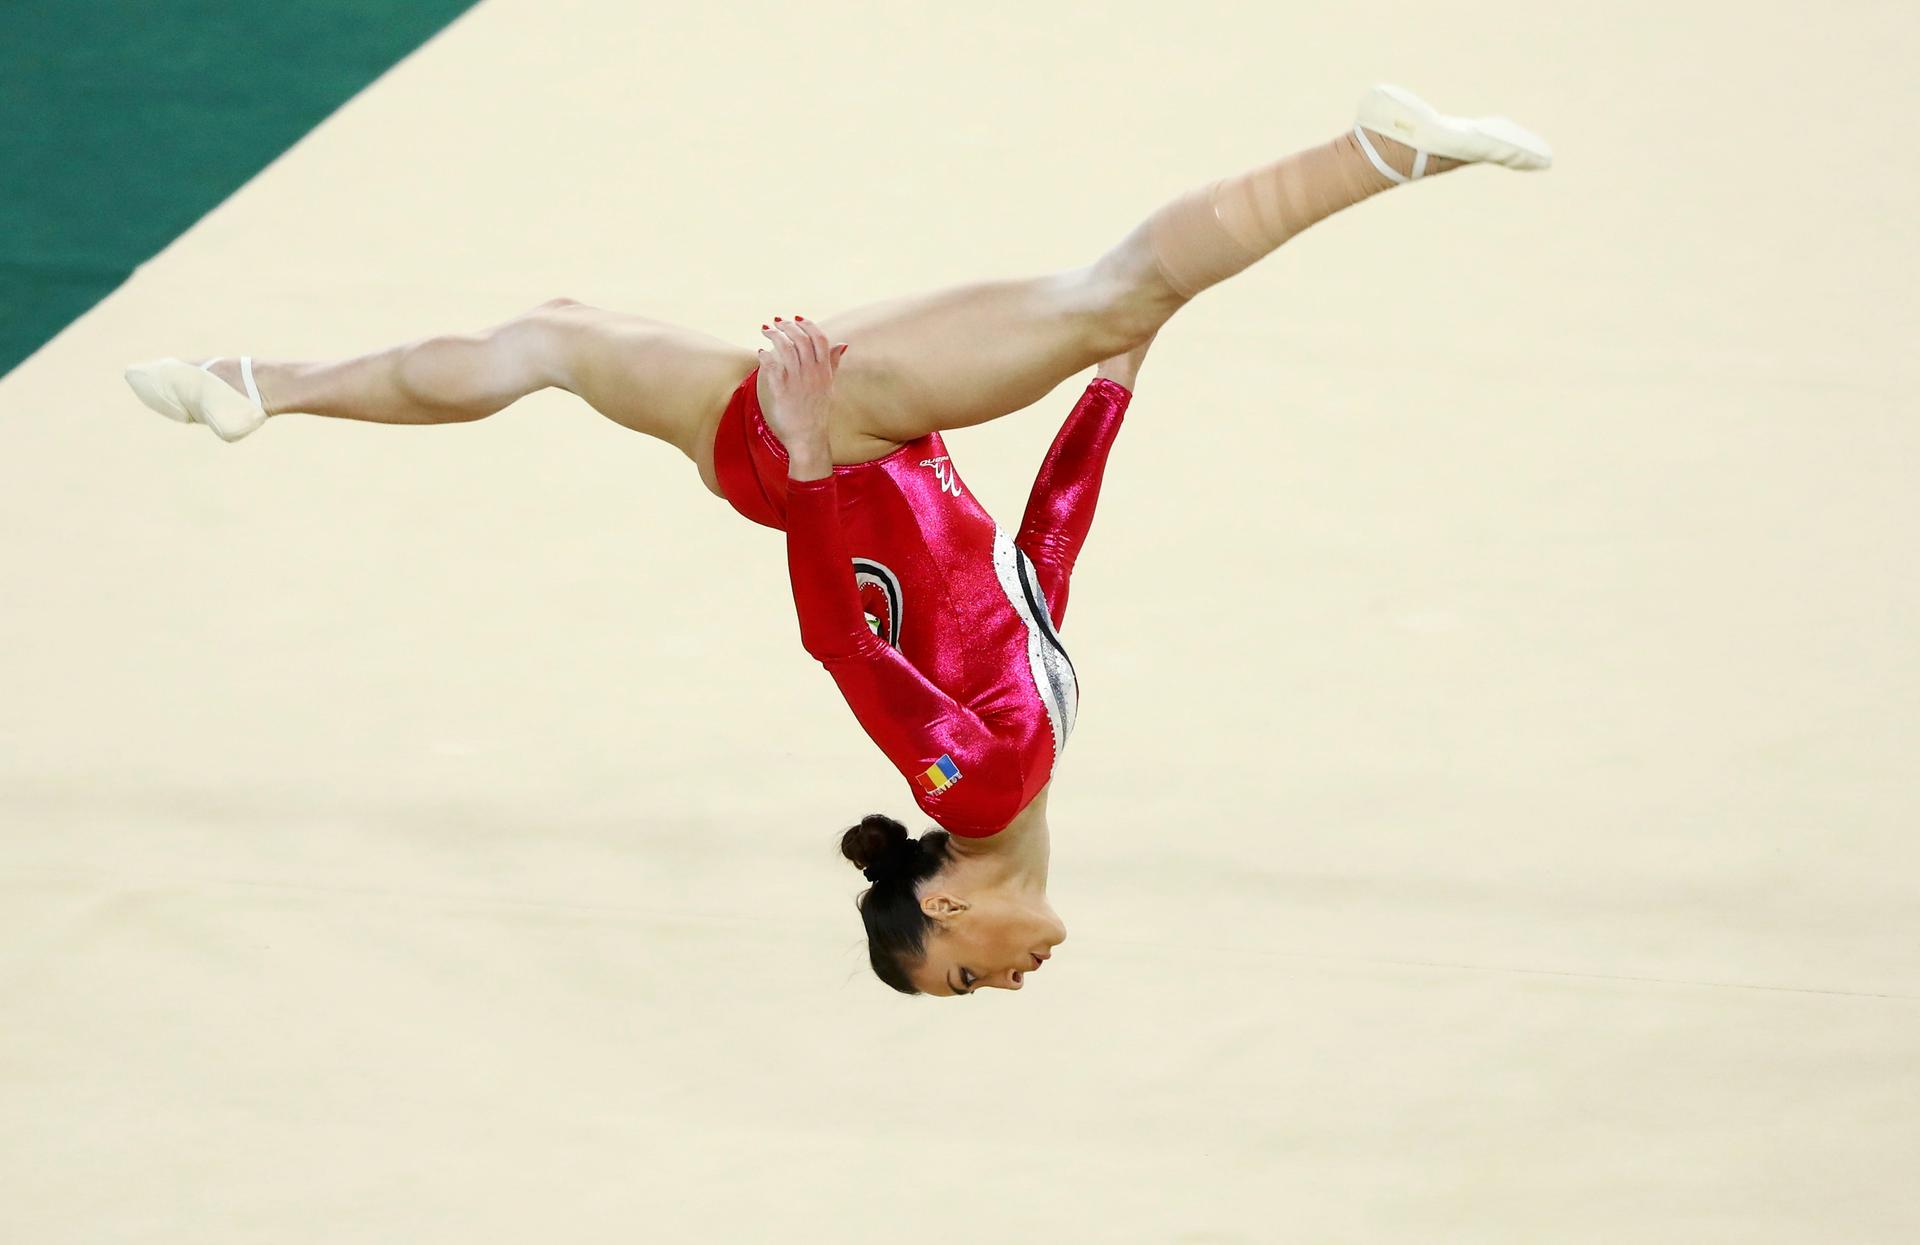 Catalina Ponor (ROU) of Romania competes on the floor during the women's qualifications.